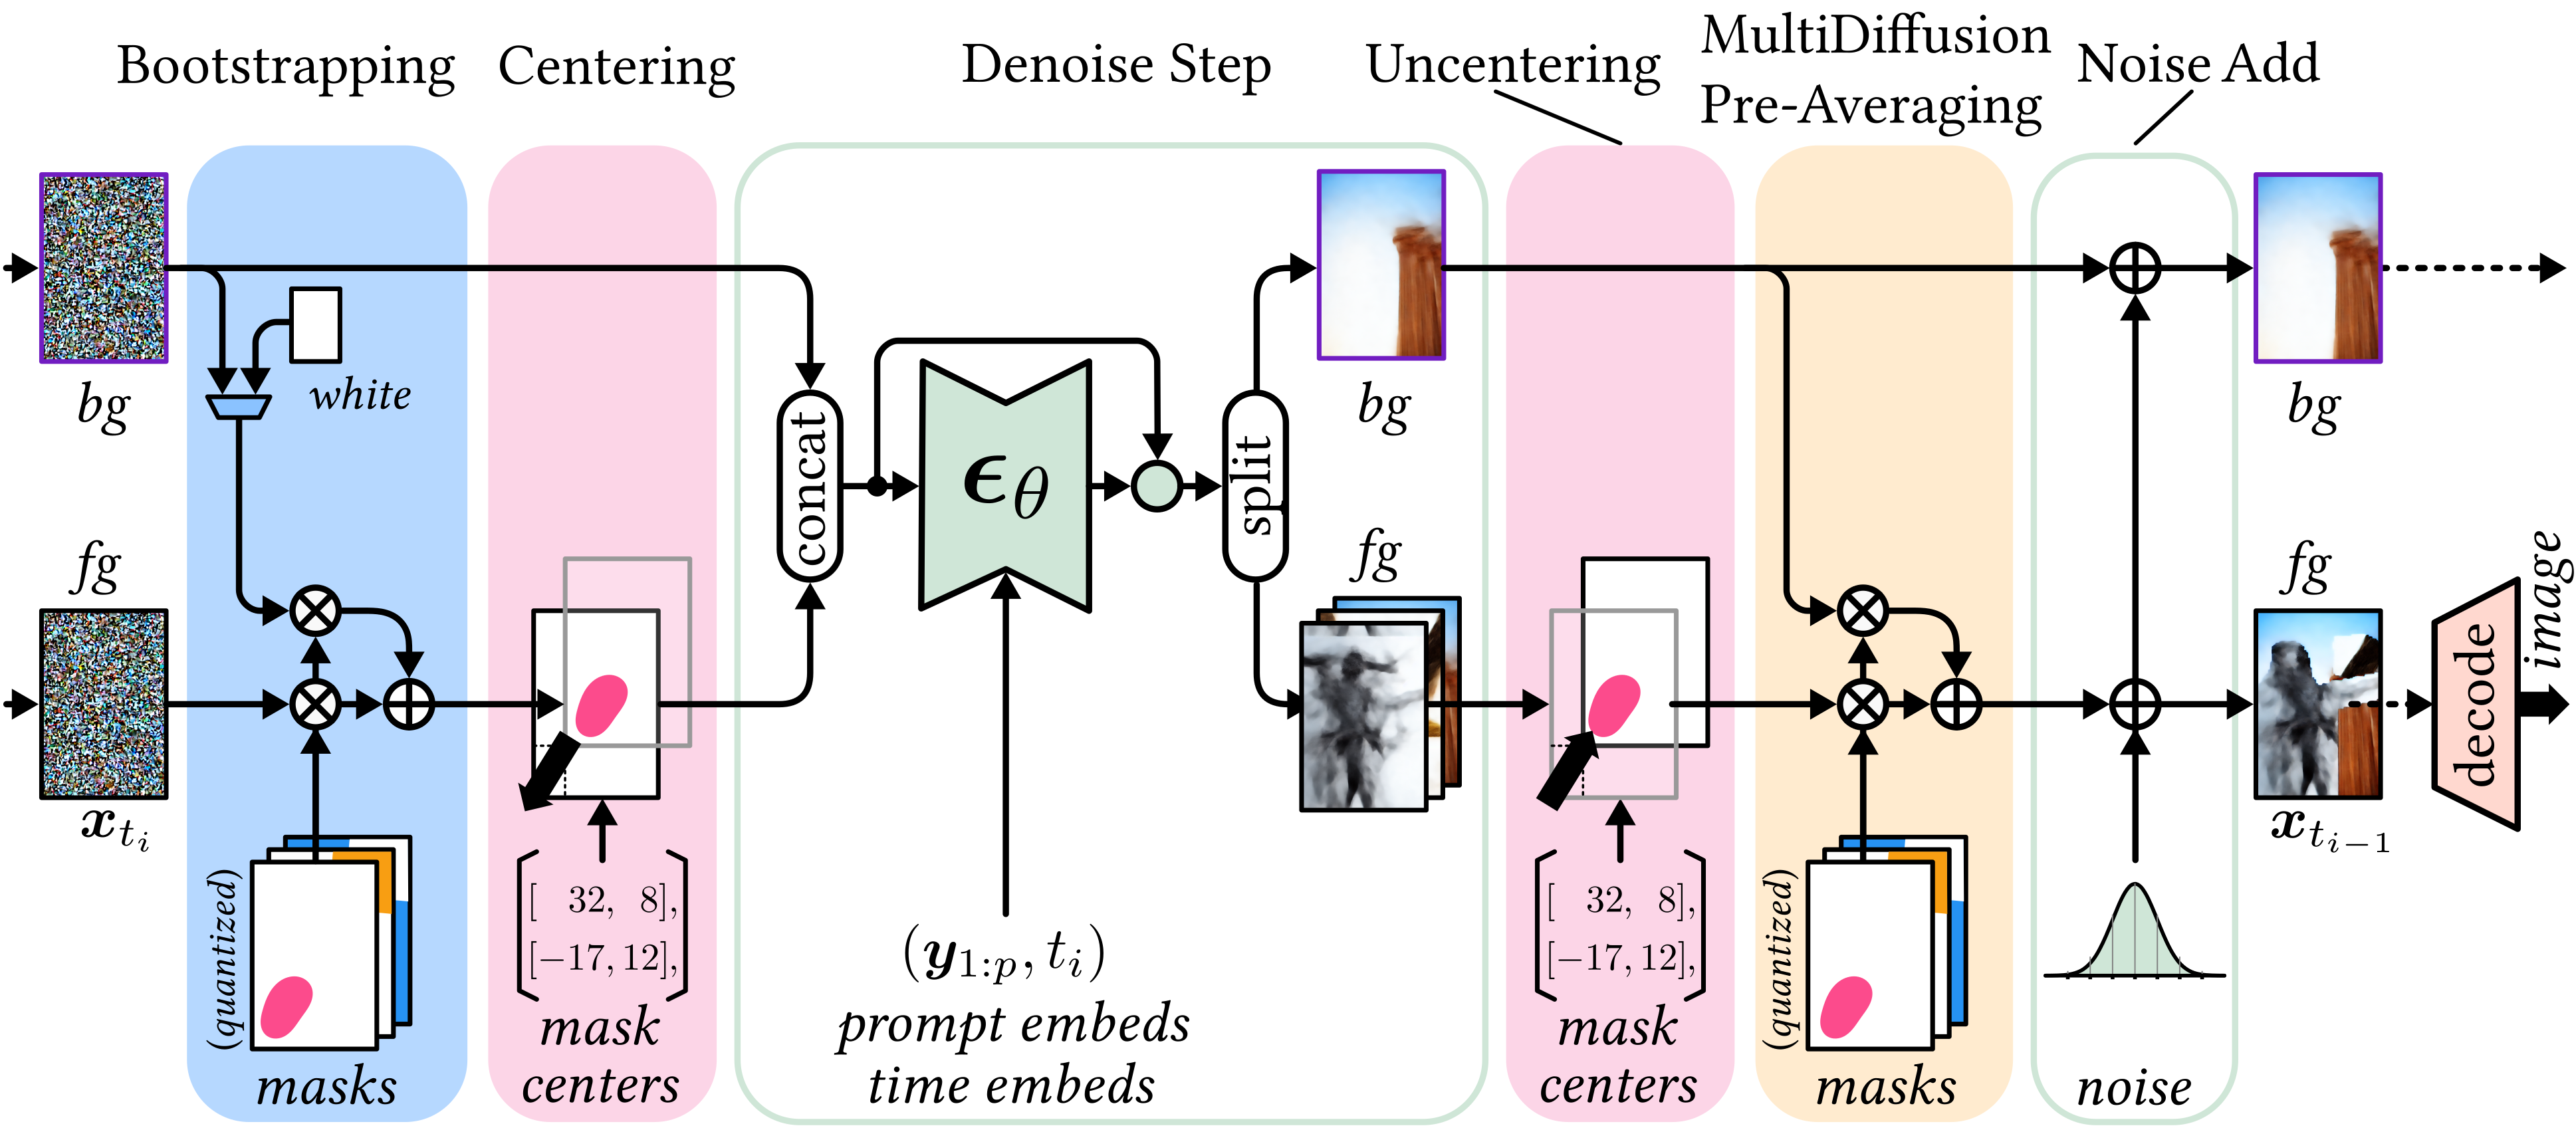 Bootstrapping mechanism of StreamMultiDiffusion